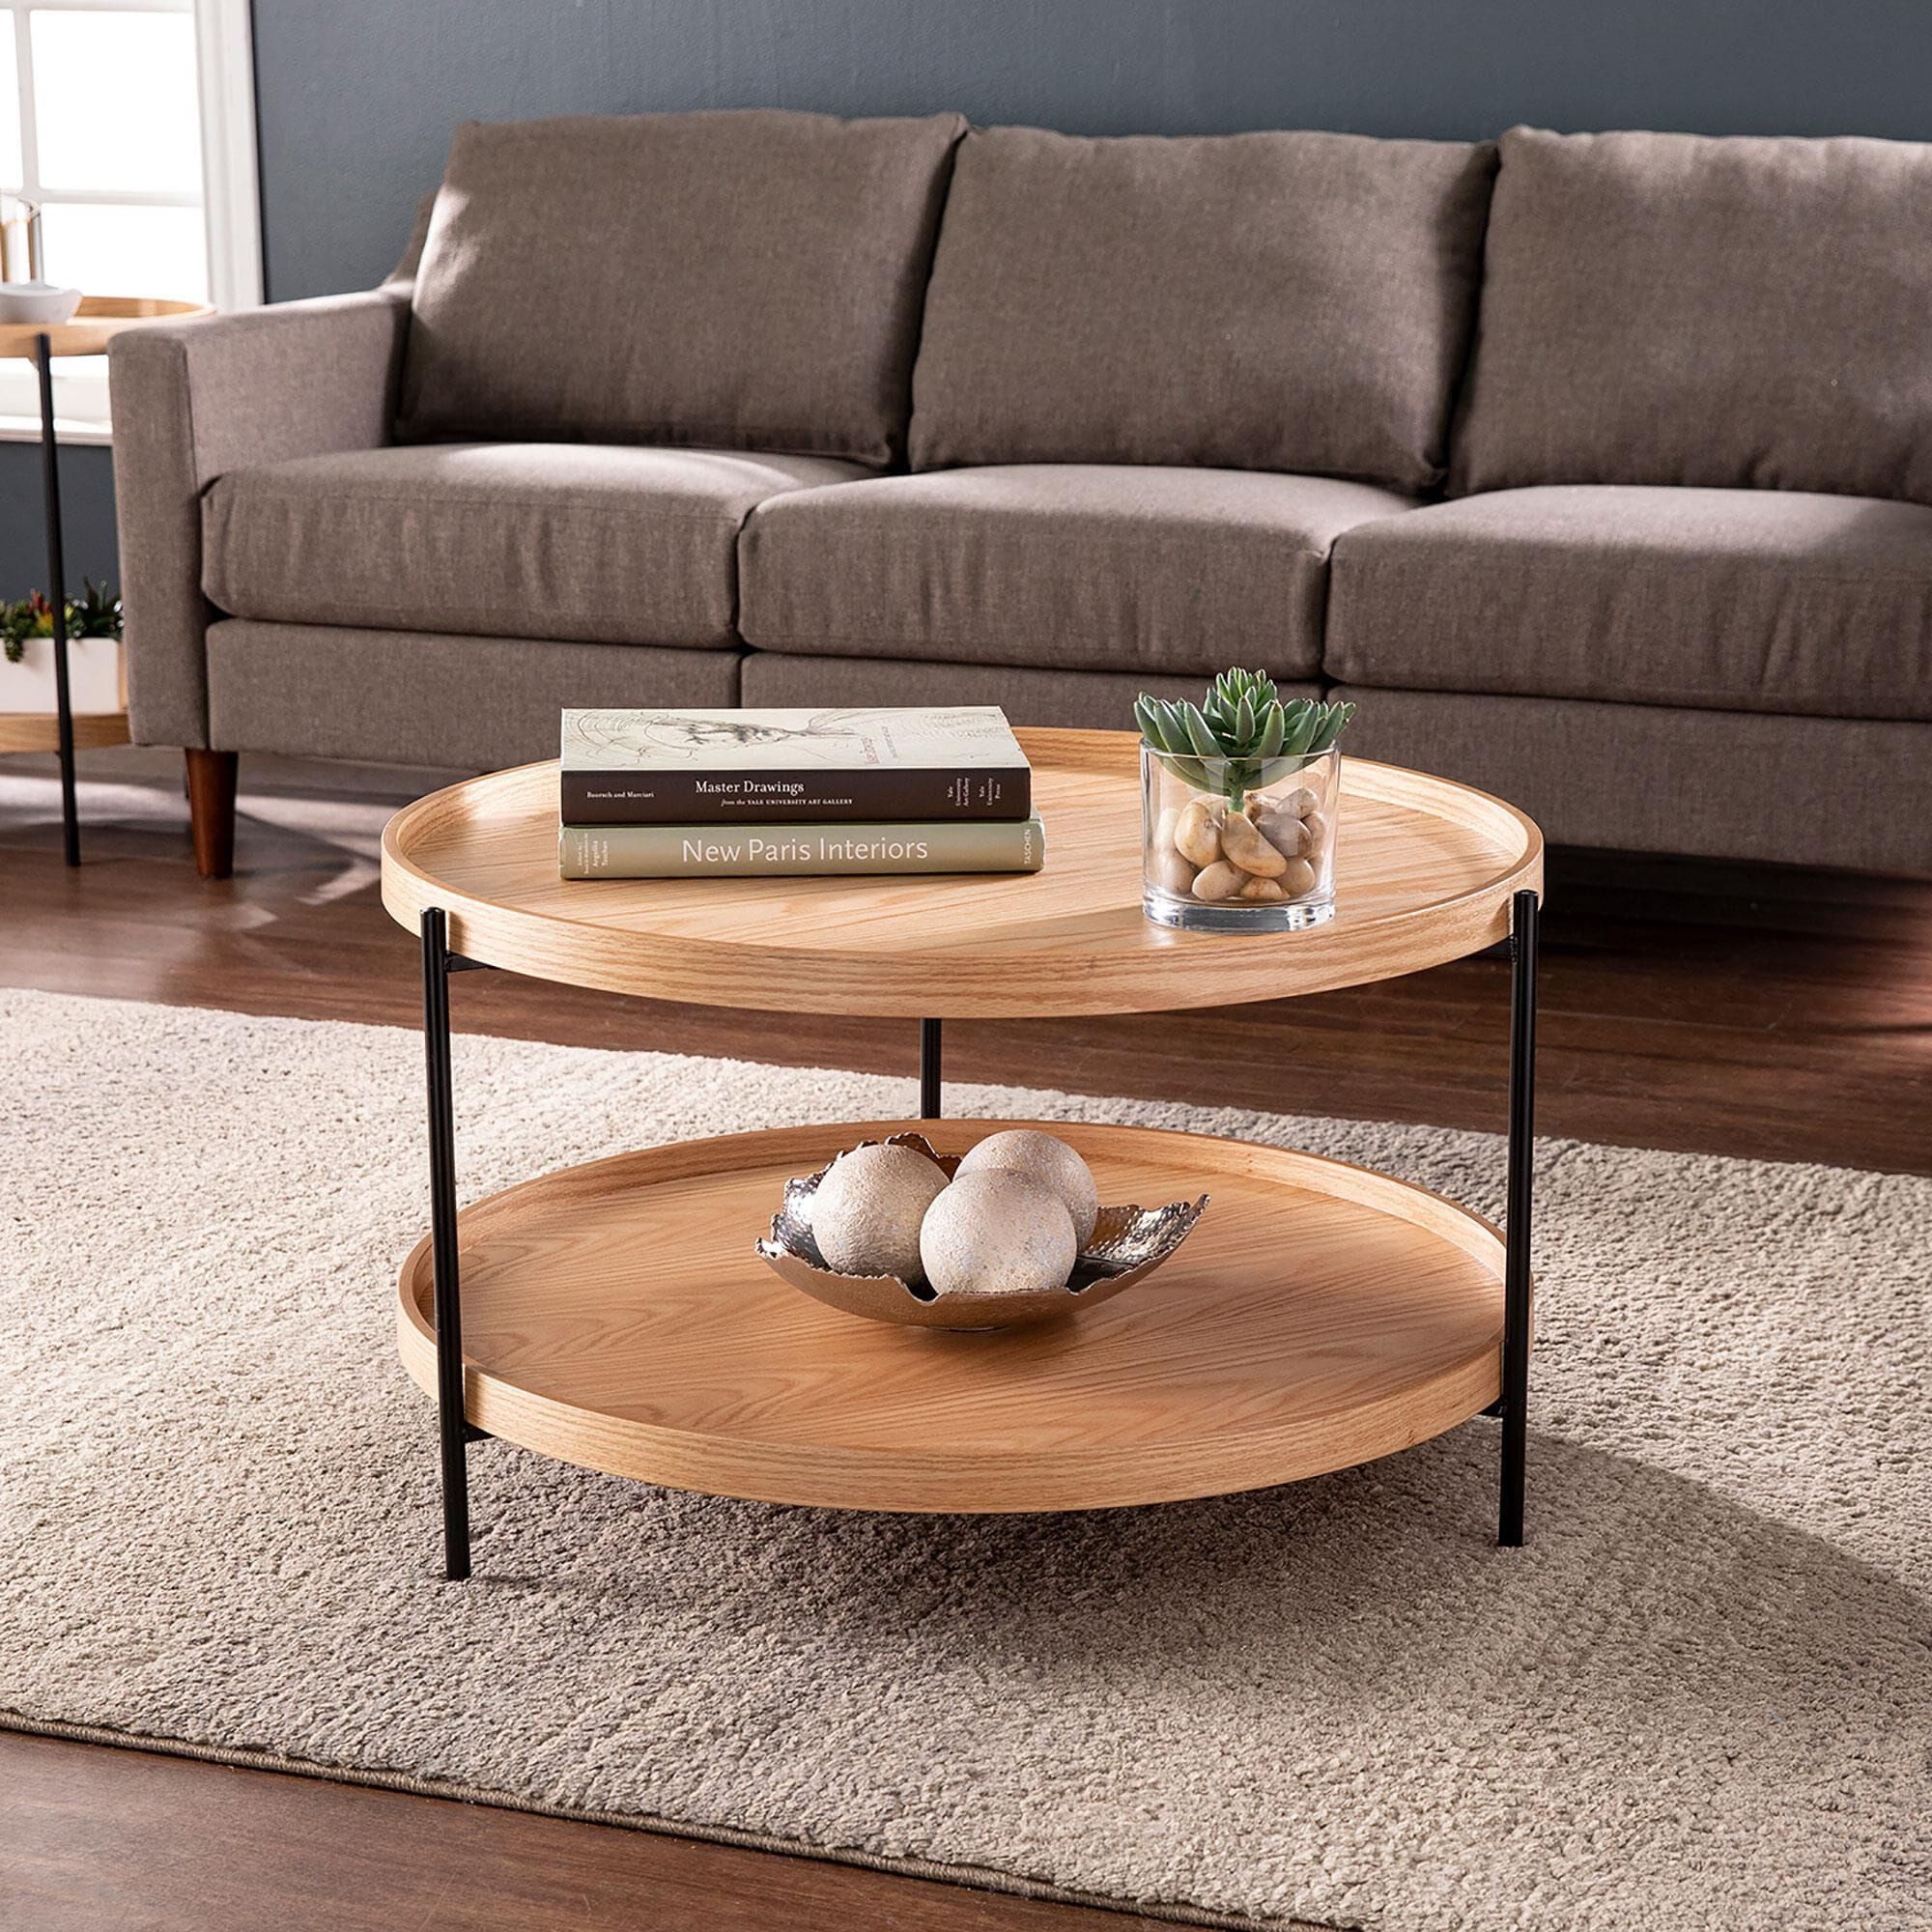 Southern Enterprises Verlington Coffee Table In Natural And Black | Nfm Pertaining To Southern Enterprises Larksmill Coffee Tables (View 14 of 15)